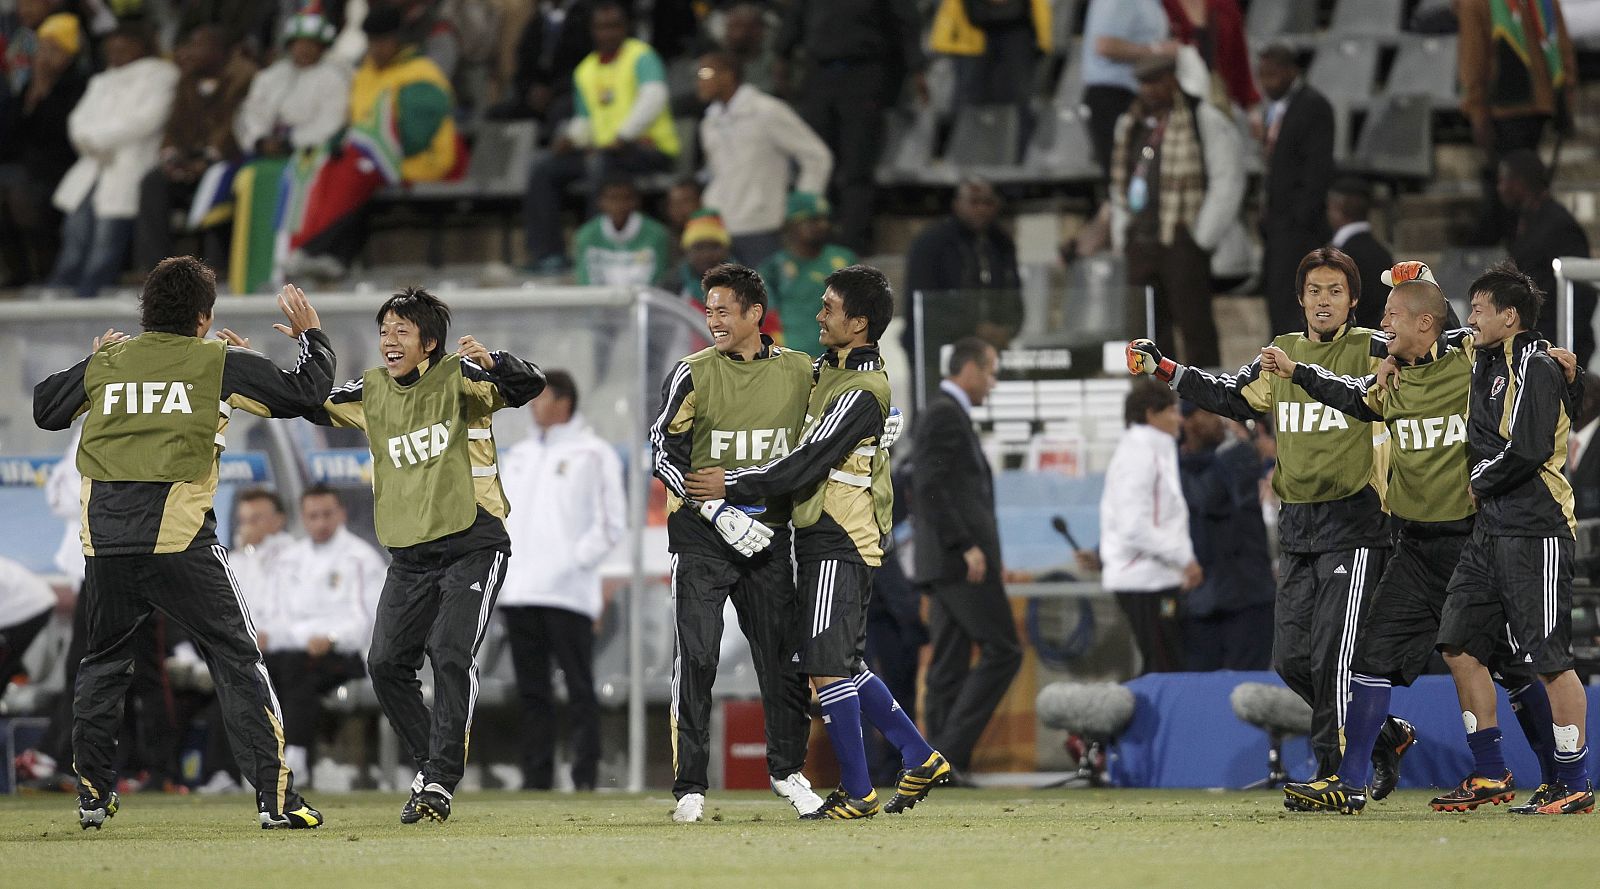 Japan players celebrates their team's win over Cameroon after the 2010 World Cup Group E soccer match at Free State stadium in Bloemfontein